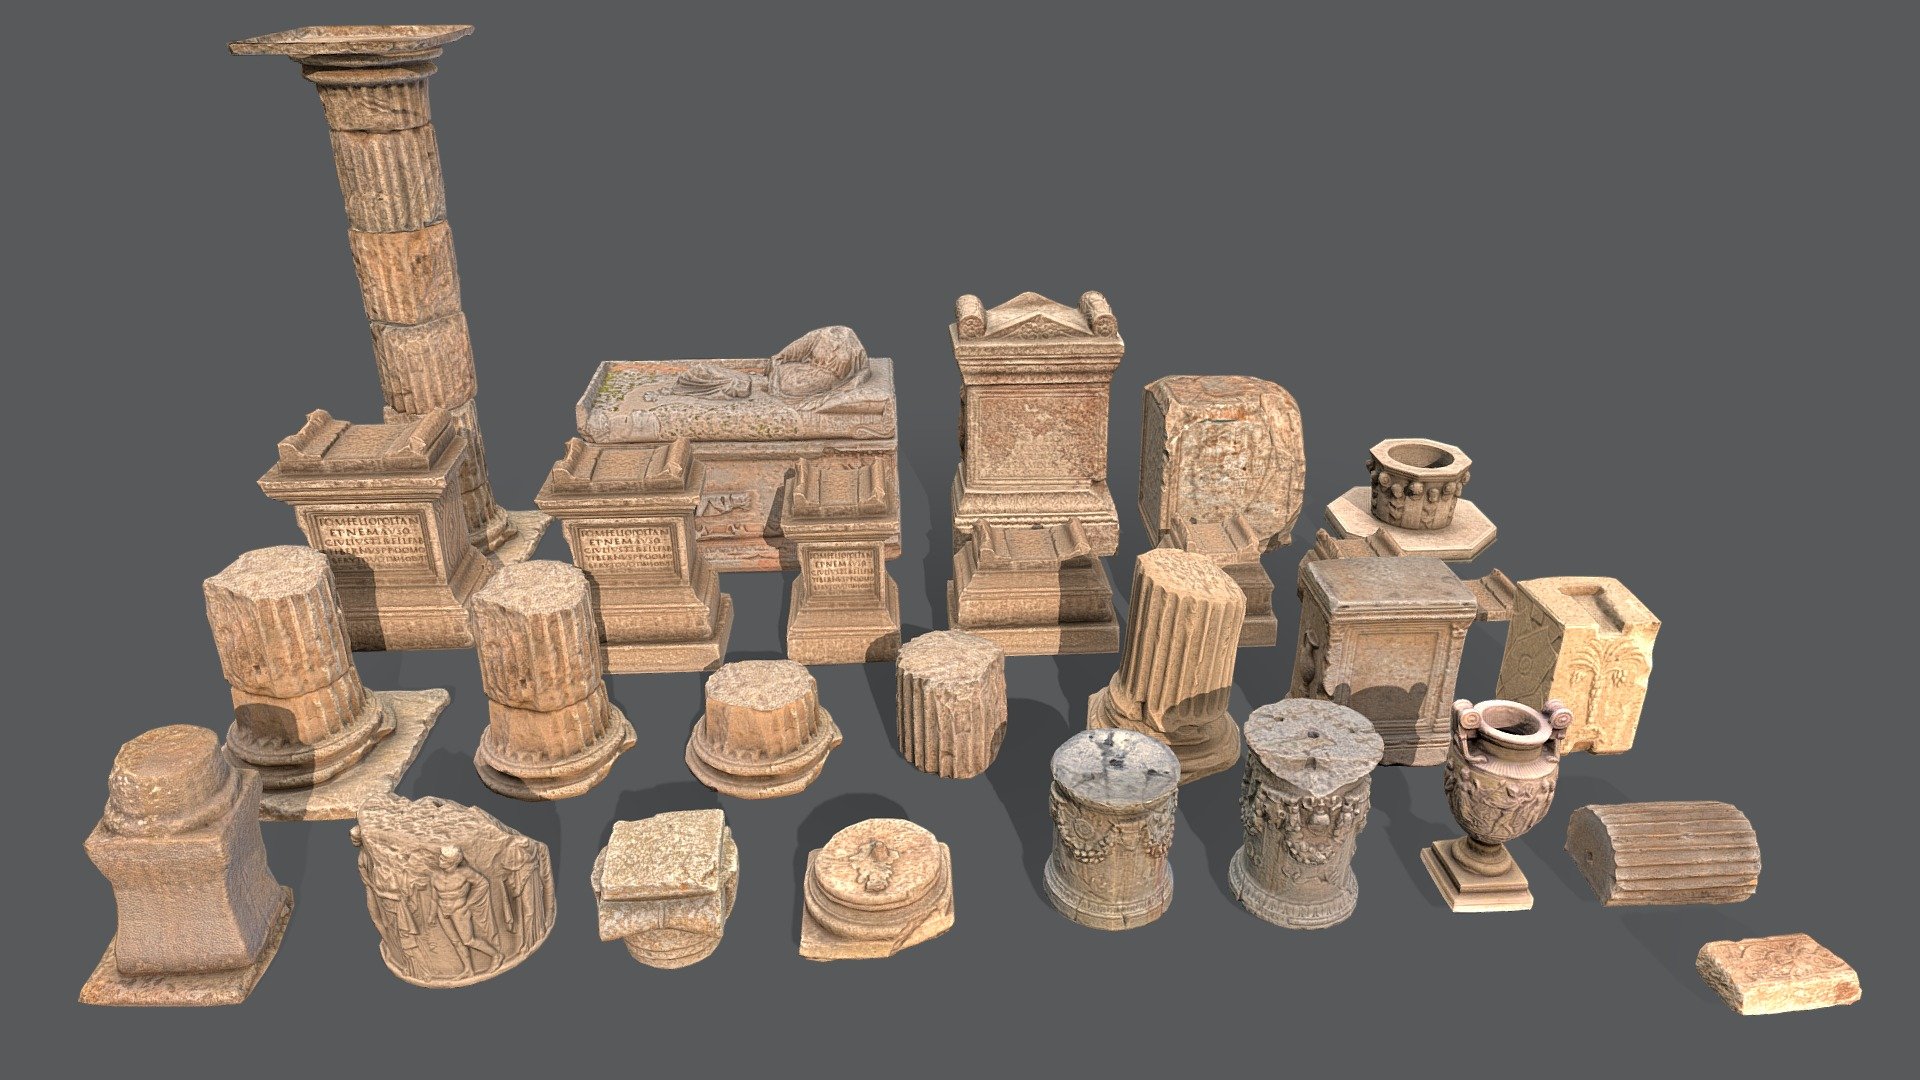 Roman Greek Objects Big Pack. Can be used to create a roman or greek environment, ancient temple, house, ruins of and ancient city

Exterior/interior stone objects.

All objects are low-poly with a good unwraping. 

17 objects with variations 3d model